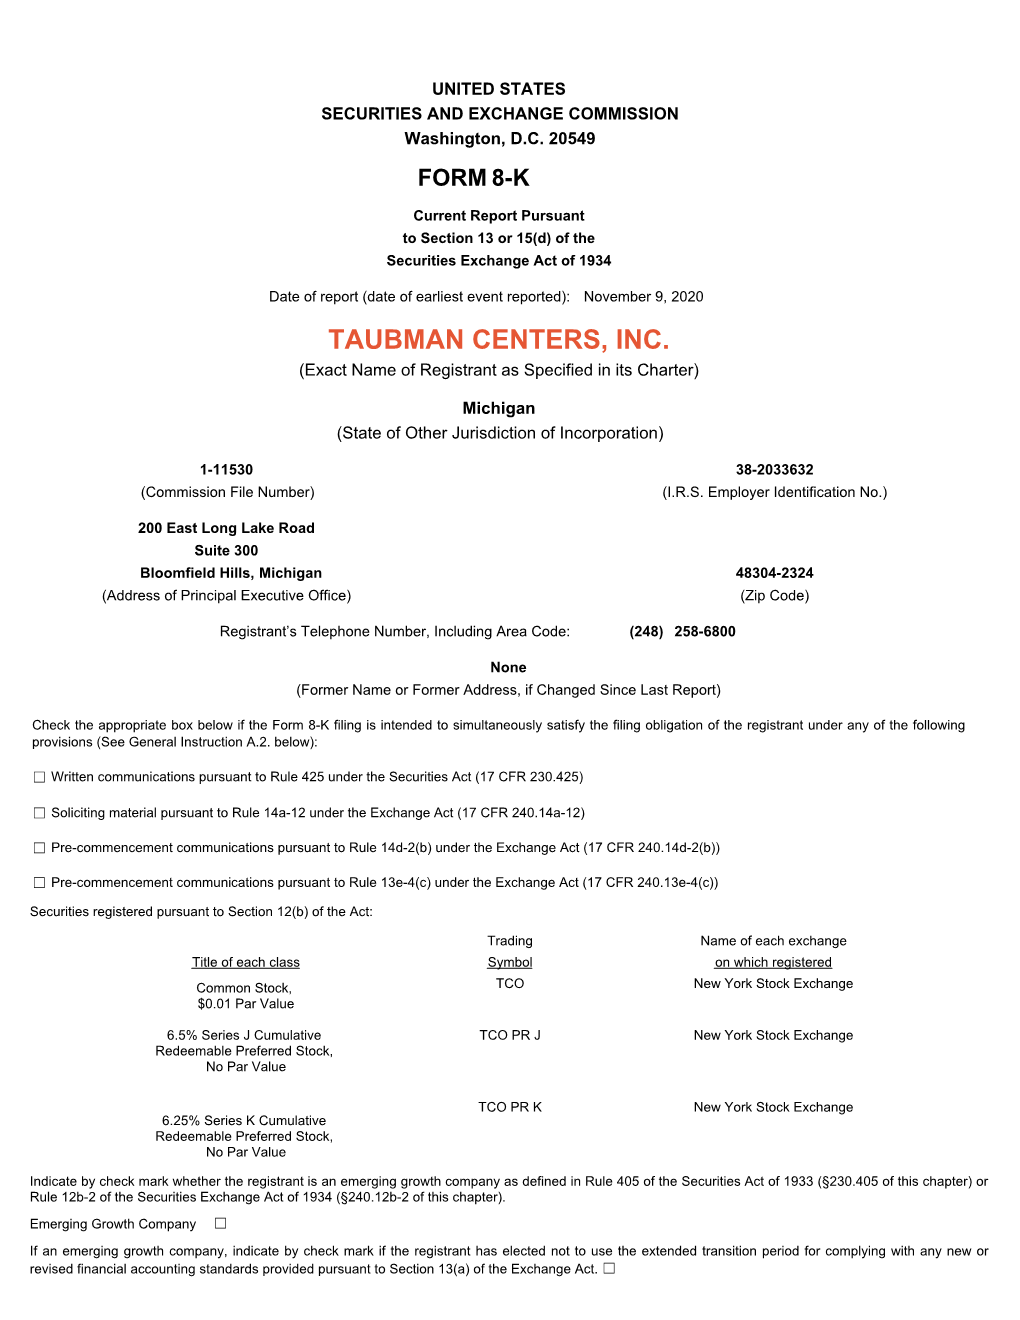 TAUBMAN CENTERS, INC. (Exact Name of Registrant As Specified in Its Charter)